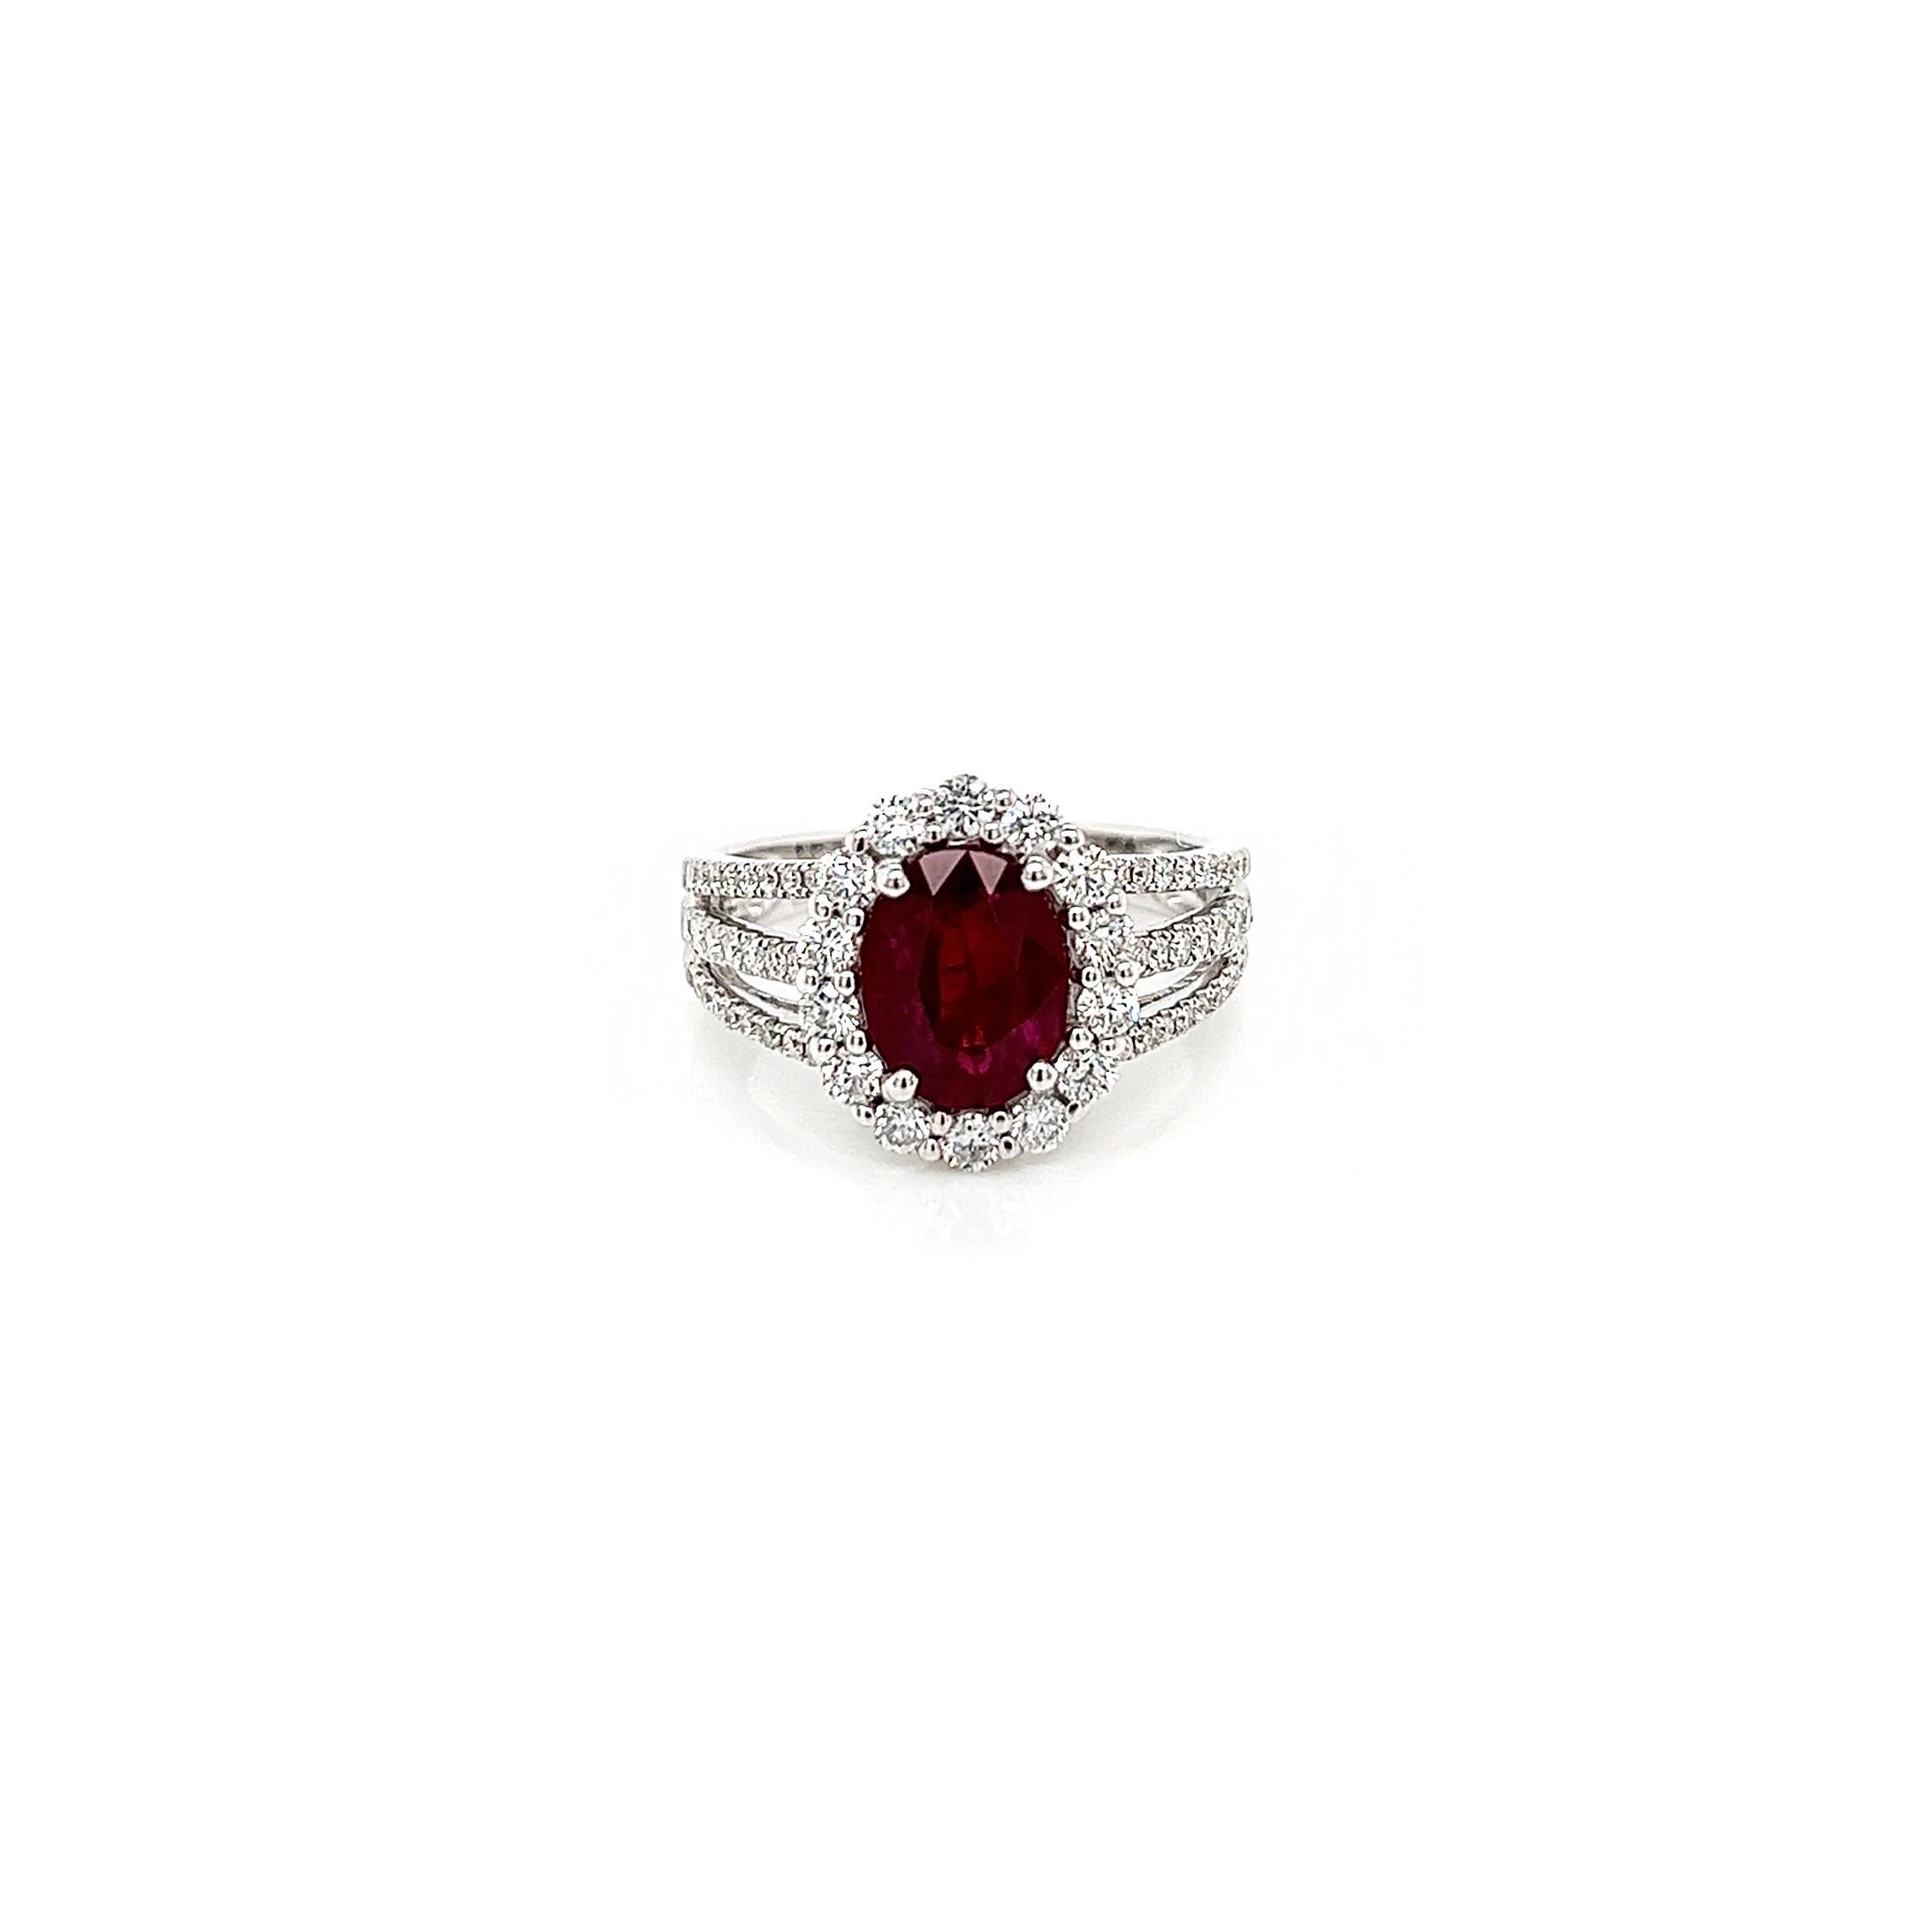 2.90 Total Carat Oval Ruby and Diamond Halo Ladies Ring. GIA Certified.

-Metal Type: 18K White Gold
-2.12 Carat Oval Cut Natural Ruby, GIA Certified 
-Ruby Color: Red
-0.78 Carat Round Natural side Diamonds. F-G Color, VS1-VS2 Clarity

-Size